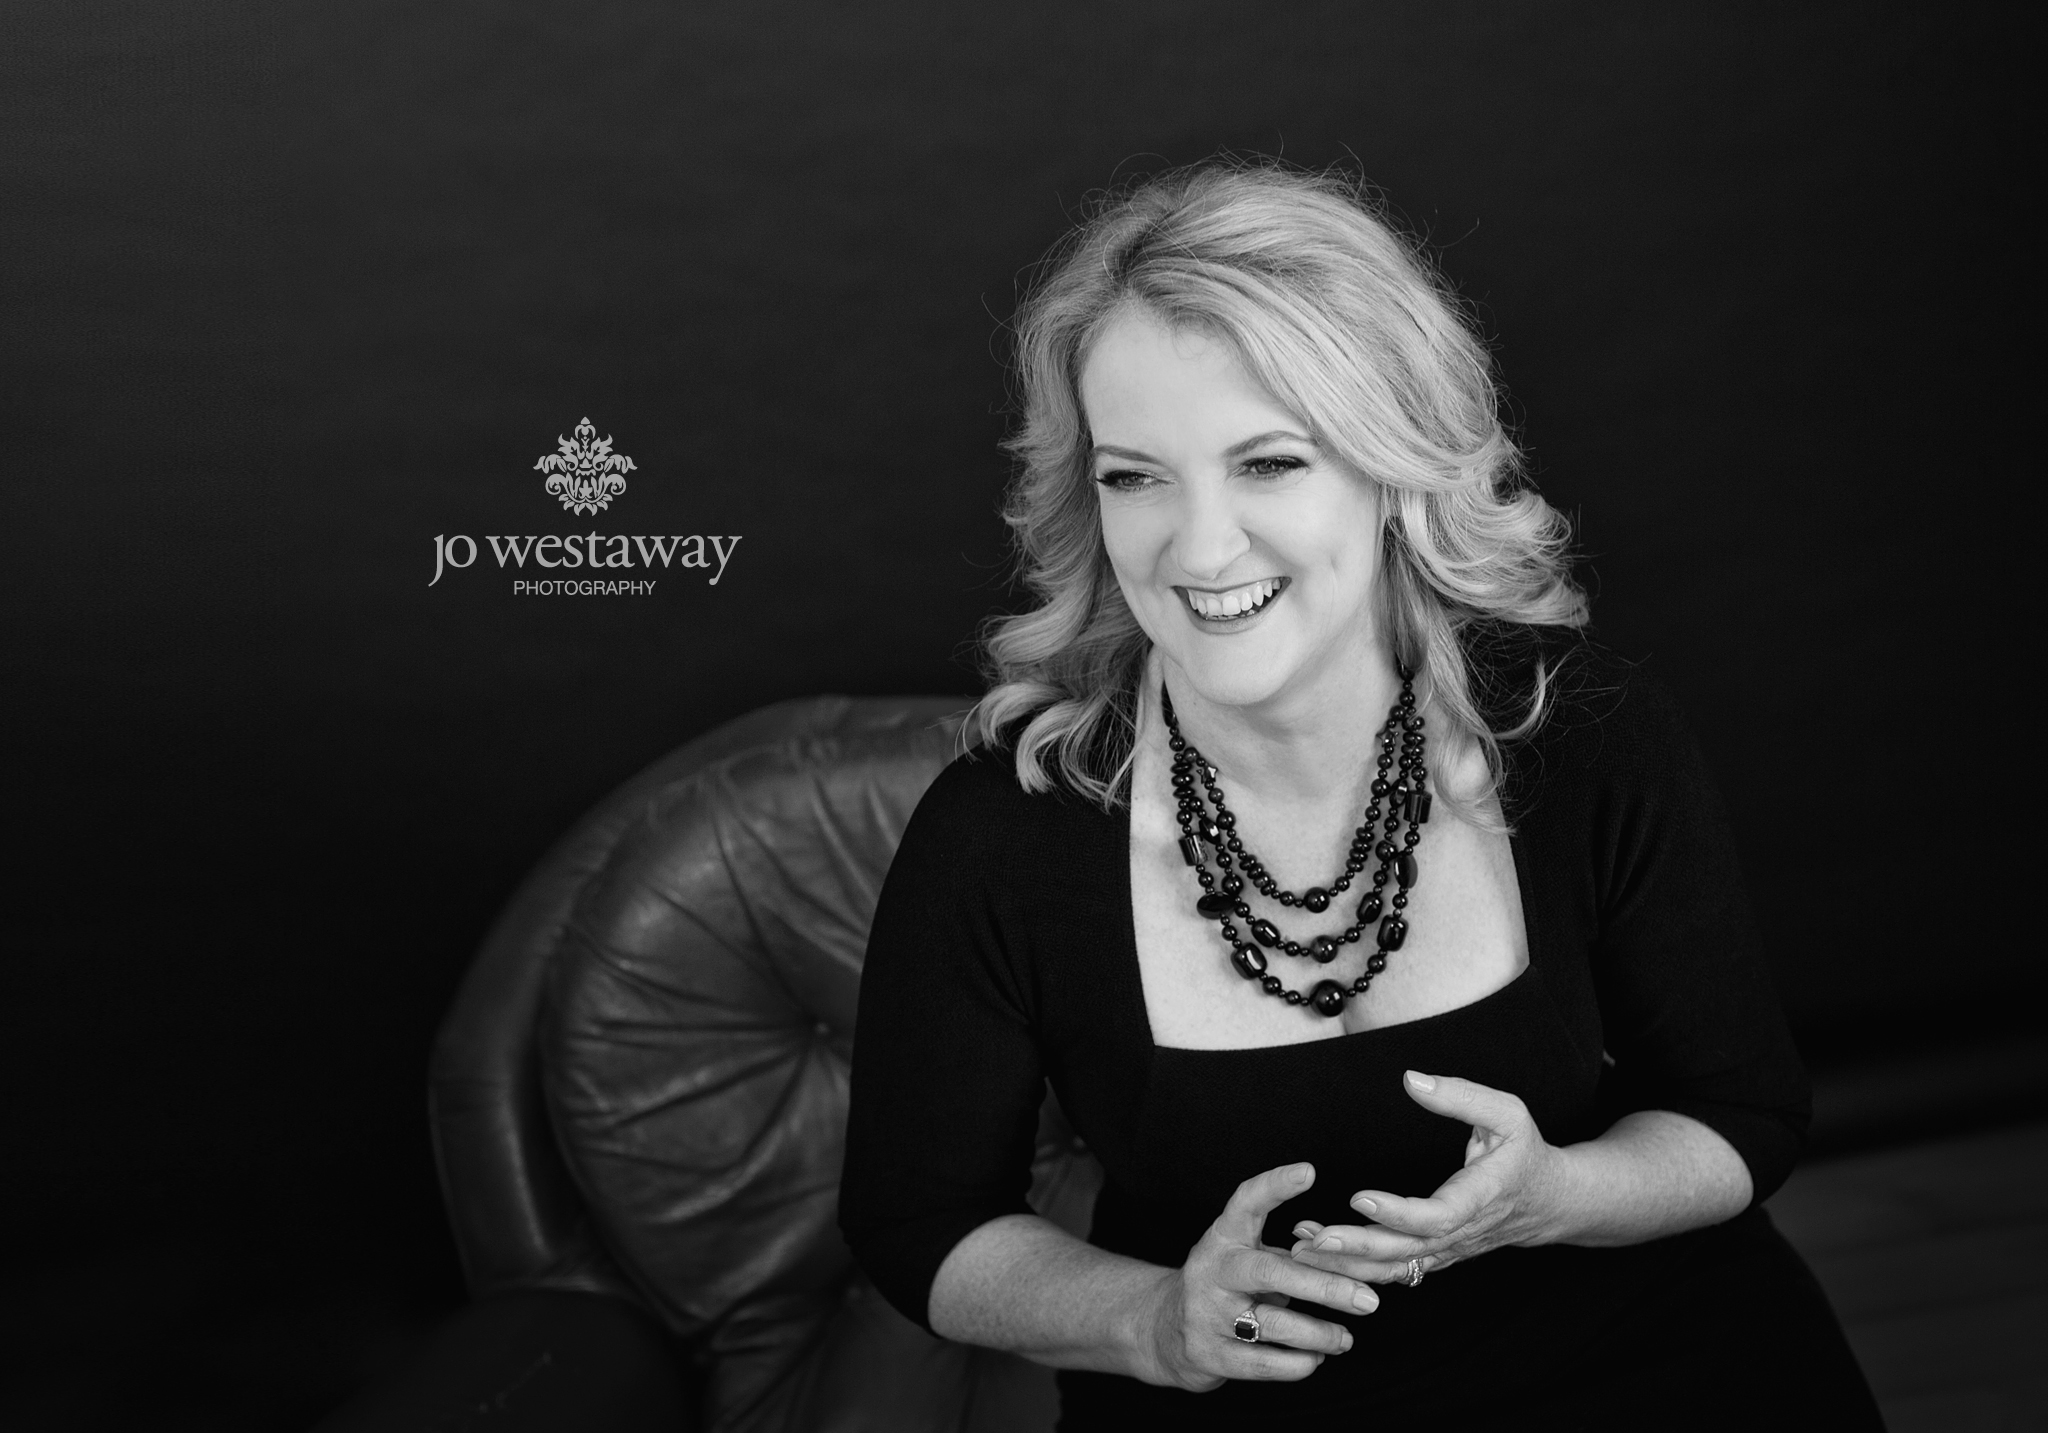 B&W headshots and personal branding images are great for action shots and showing personality and attitude